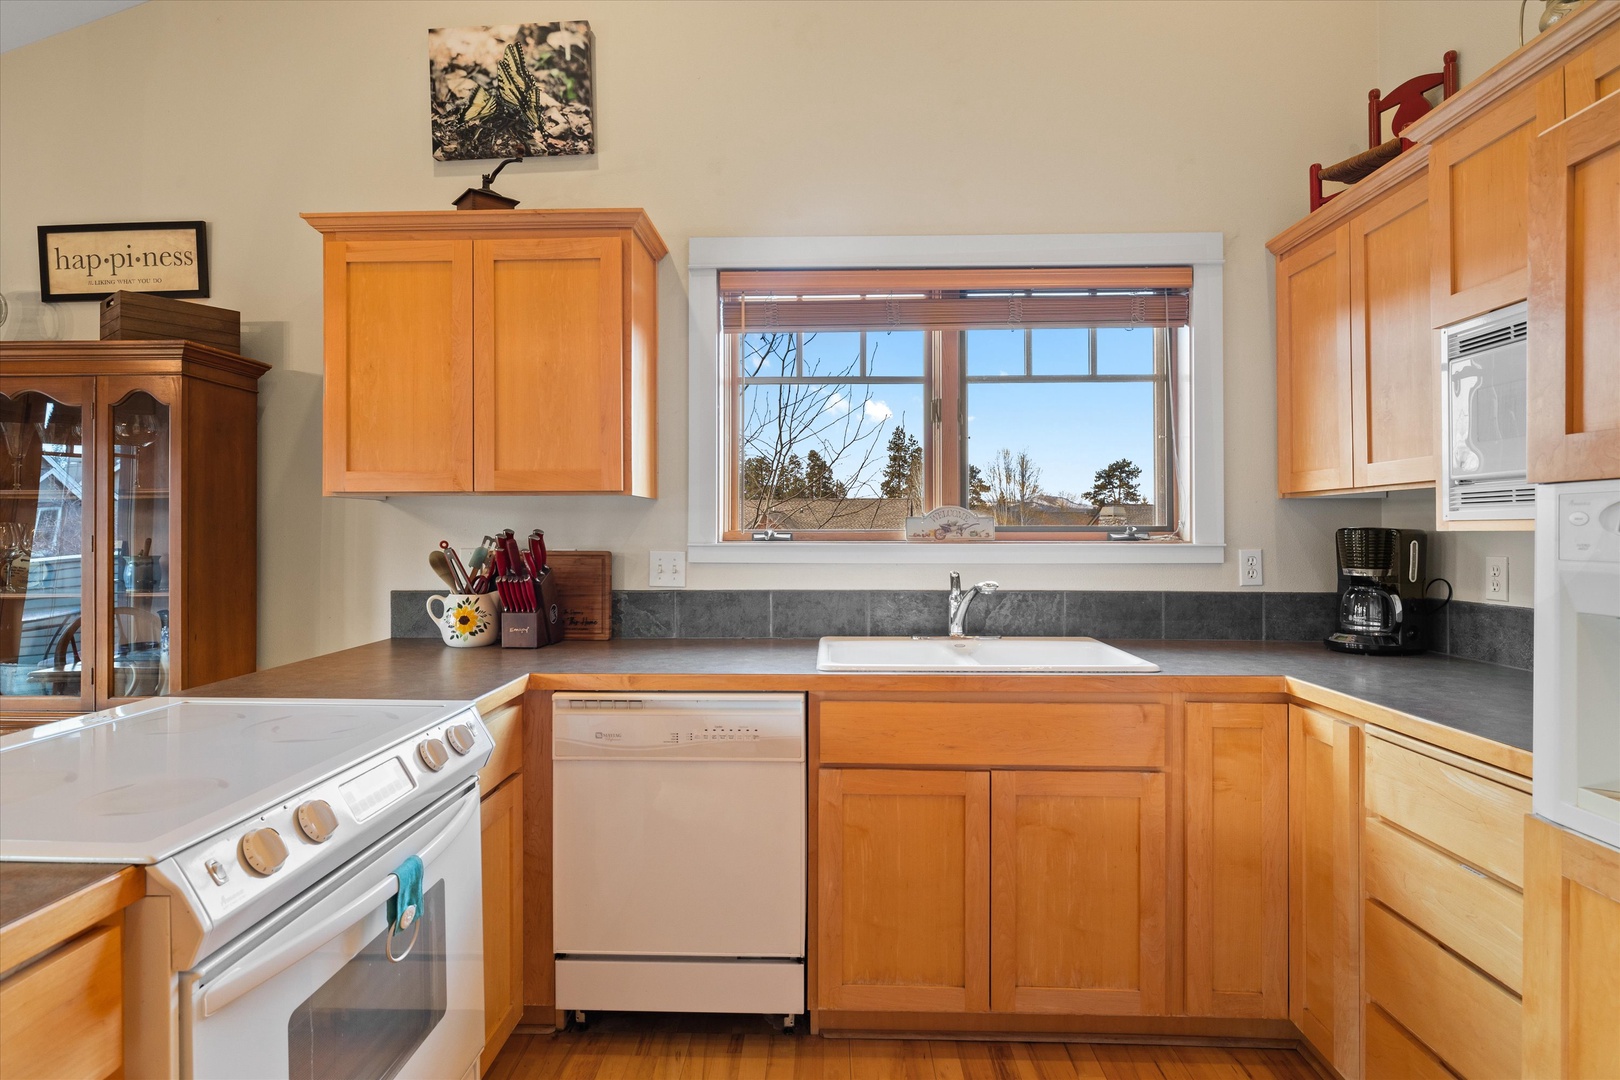 The open kitchen offers ample space & all the comforts of home